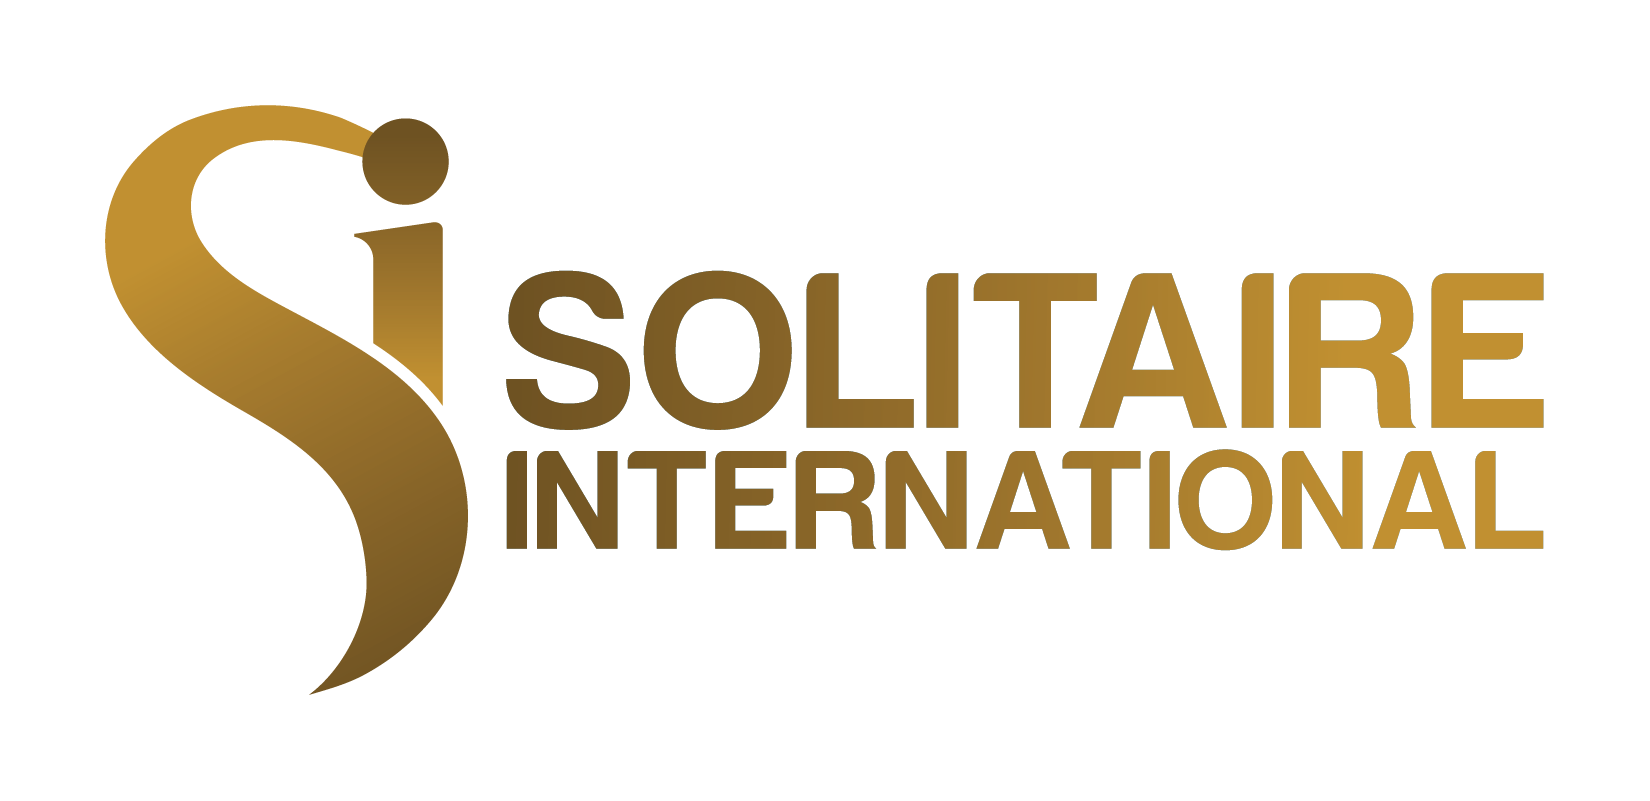 Solitaire International July 2021